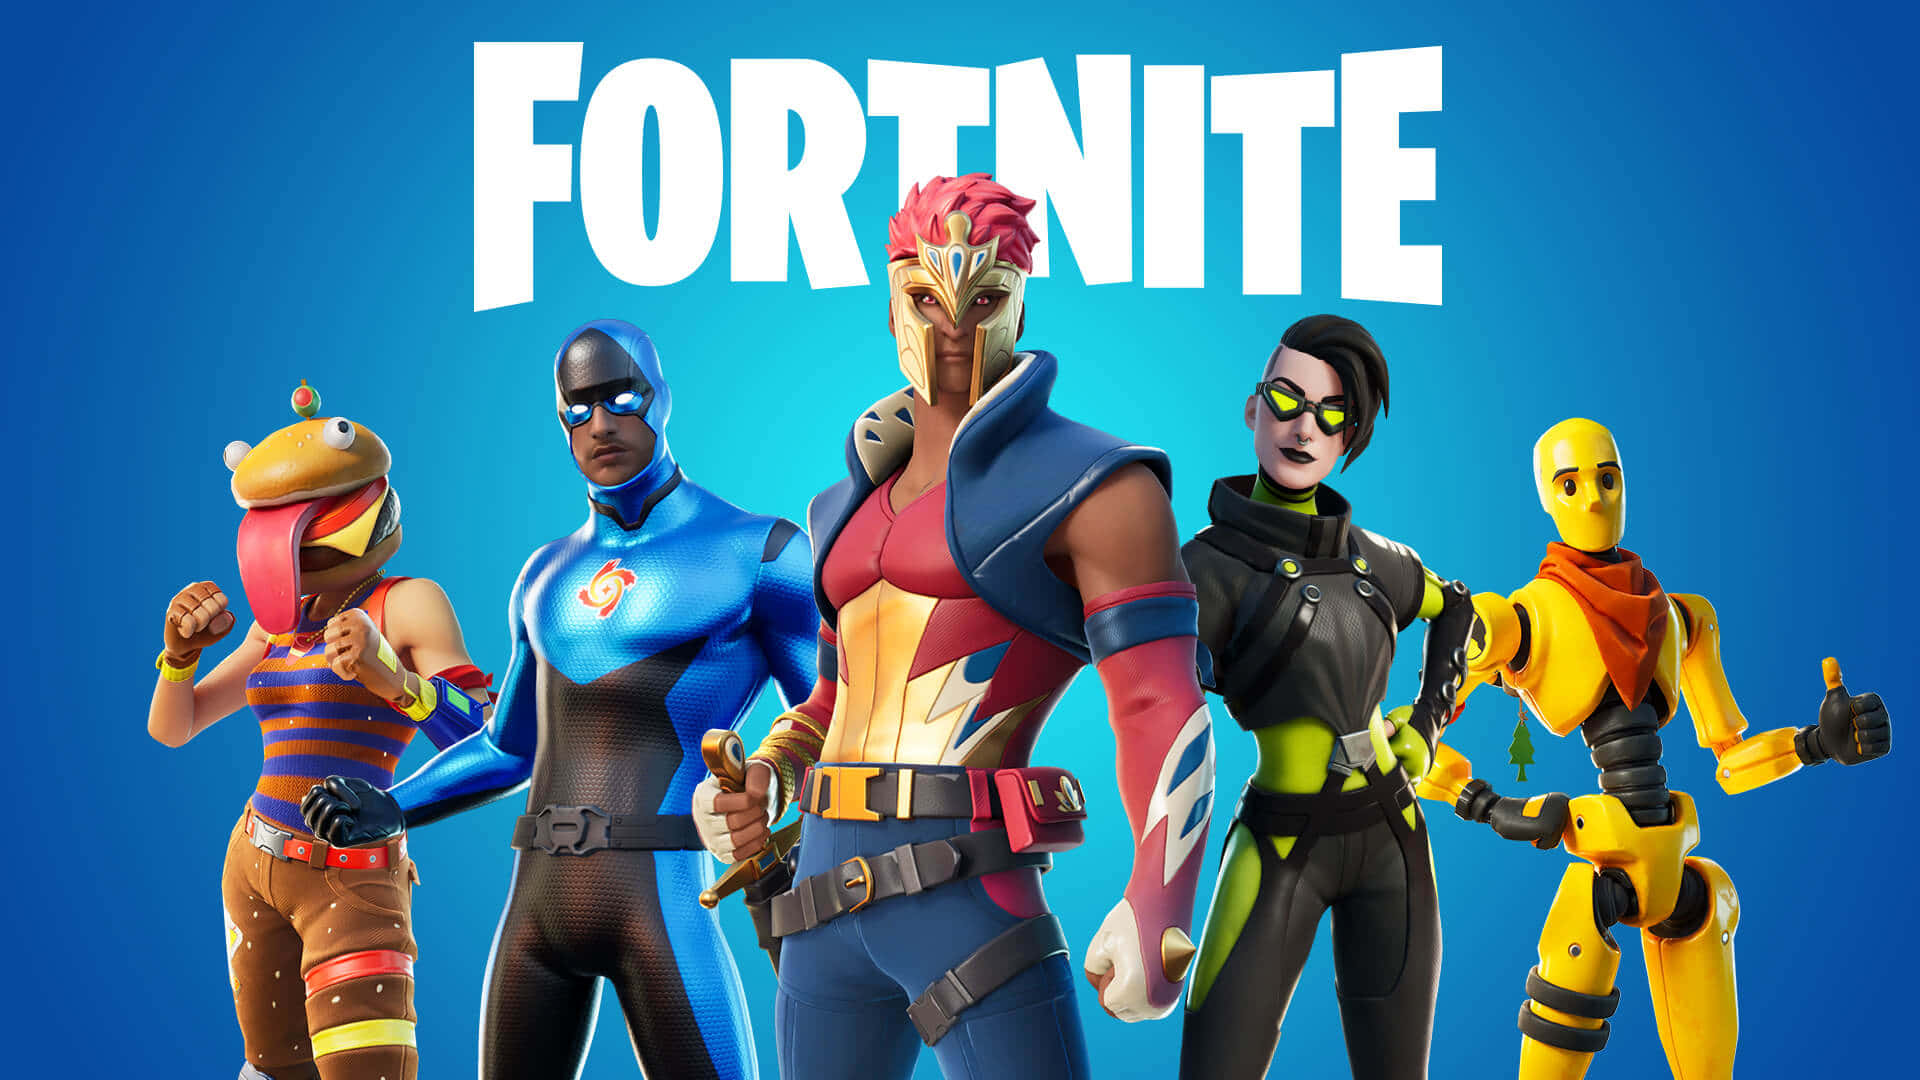 Dress Up Your Fortnite Avatar Today